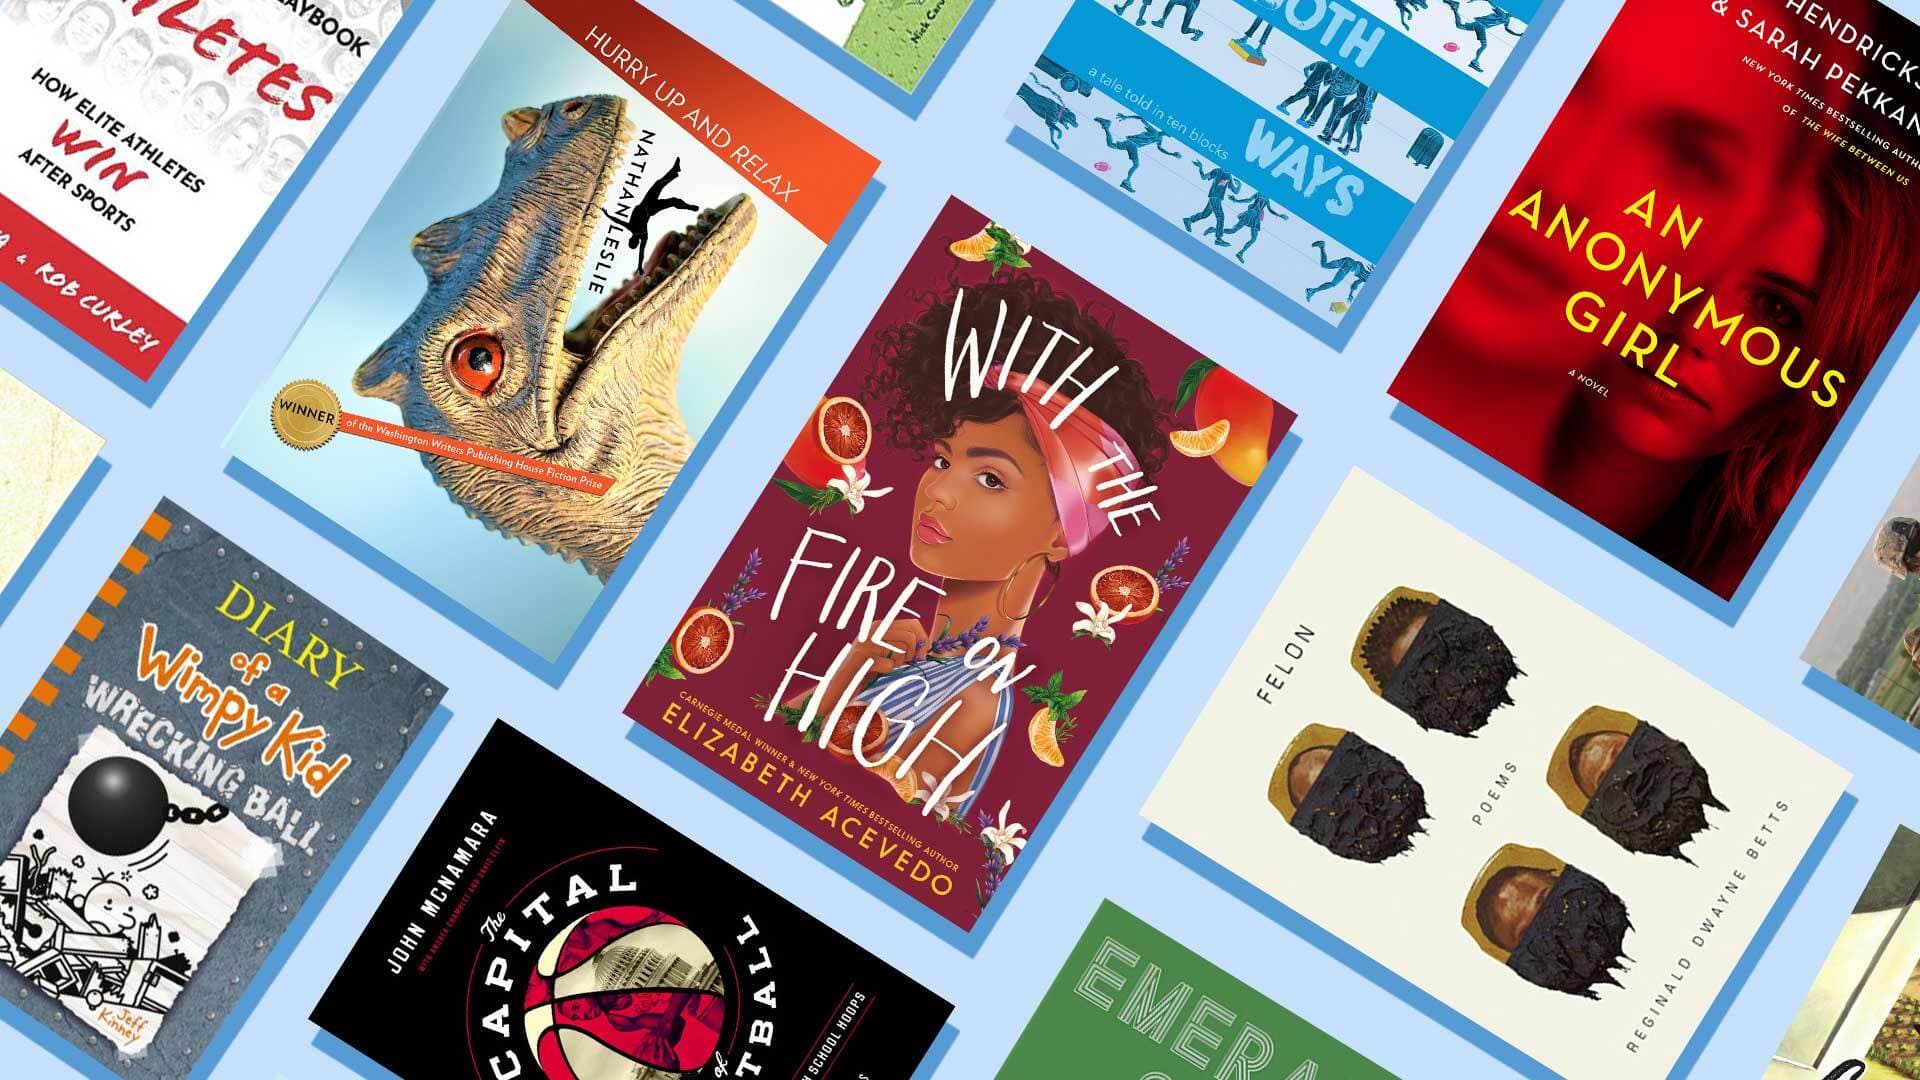 Collage of book covers, including With the Fire on High, Hurry Up and Relax, Felon, An Anonymous Girl, Diary of a Wimpy Kid: Wrecking Ball, The Capital of Basketball and more